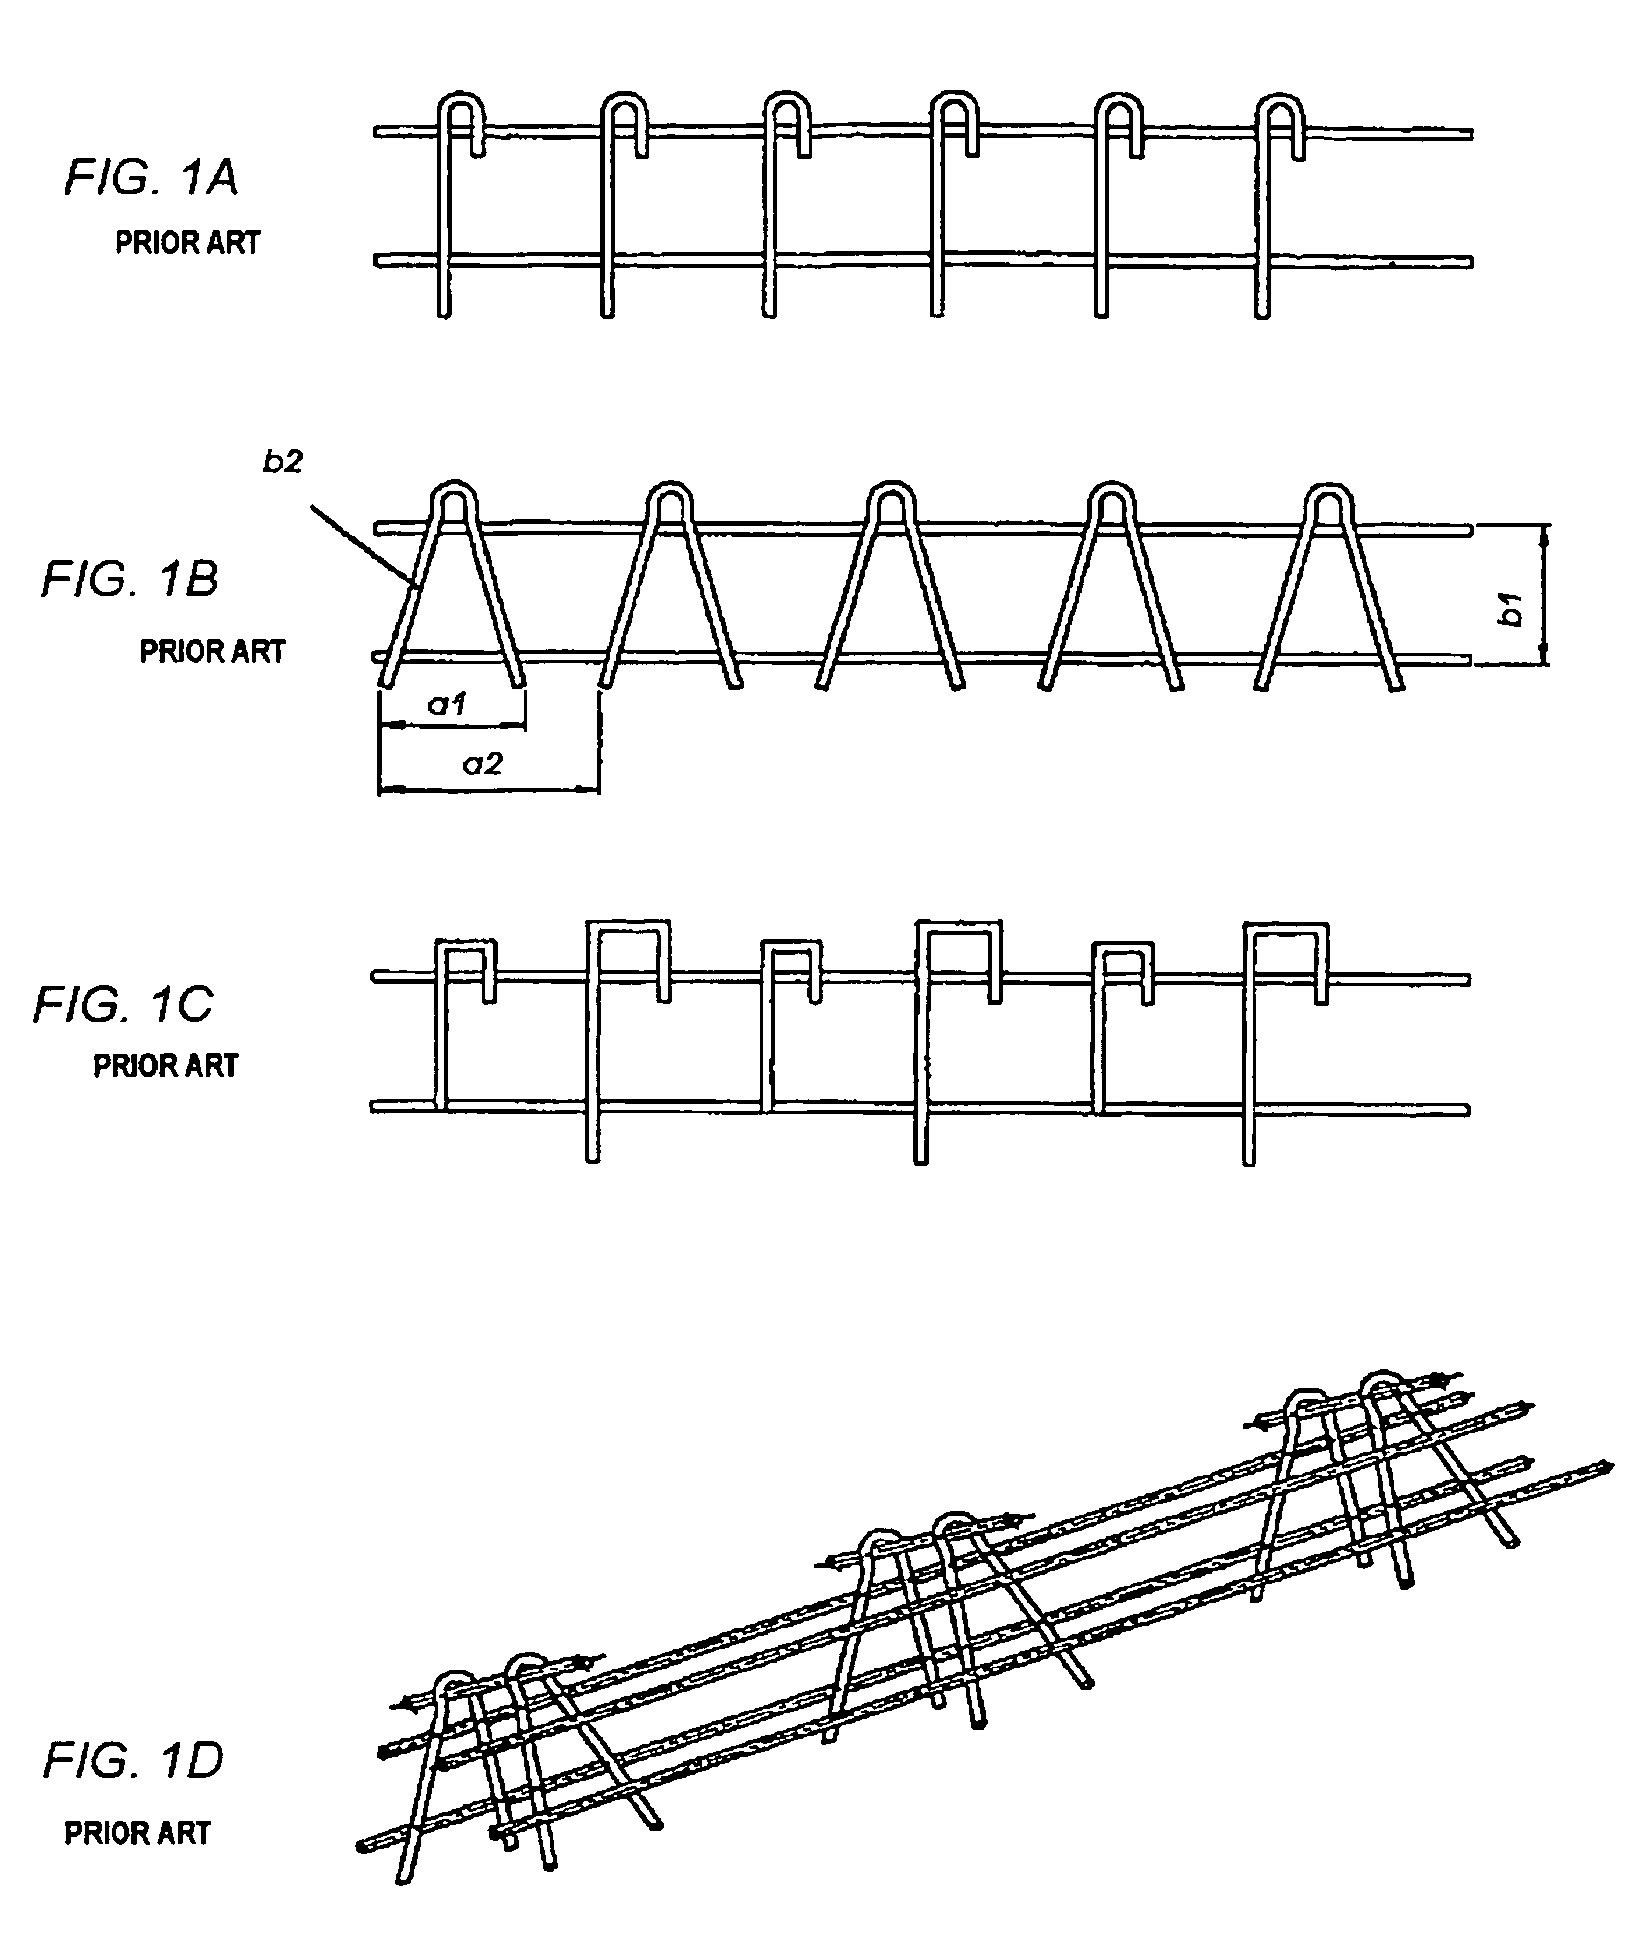 Method and machine for the production of reinforcement and dowel side frames for concrete reinforcement from wire or rod or other material of prismatic cross section